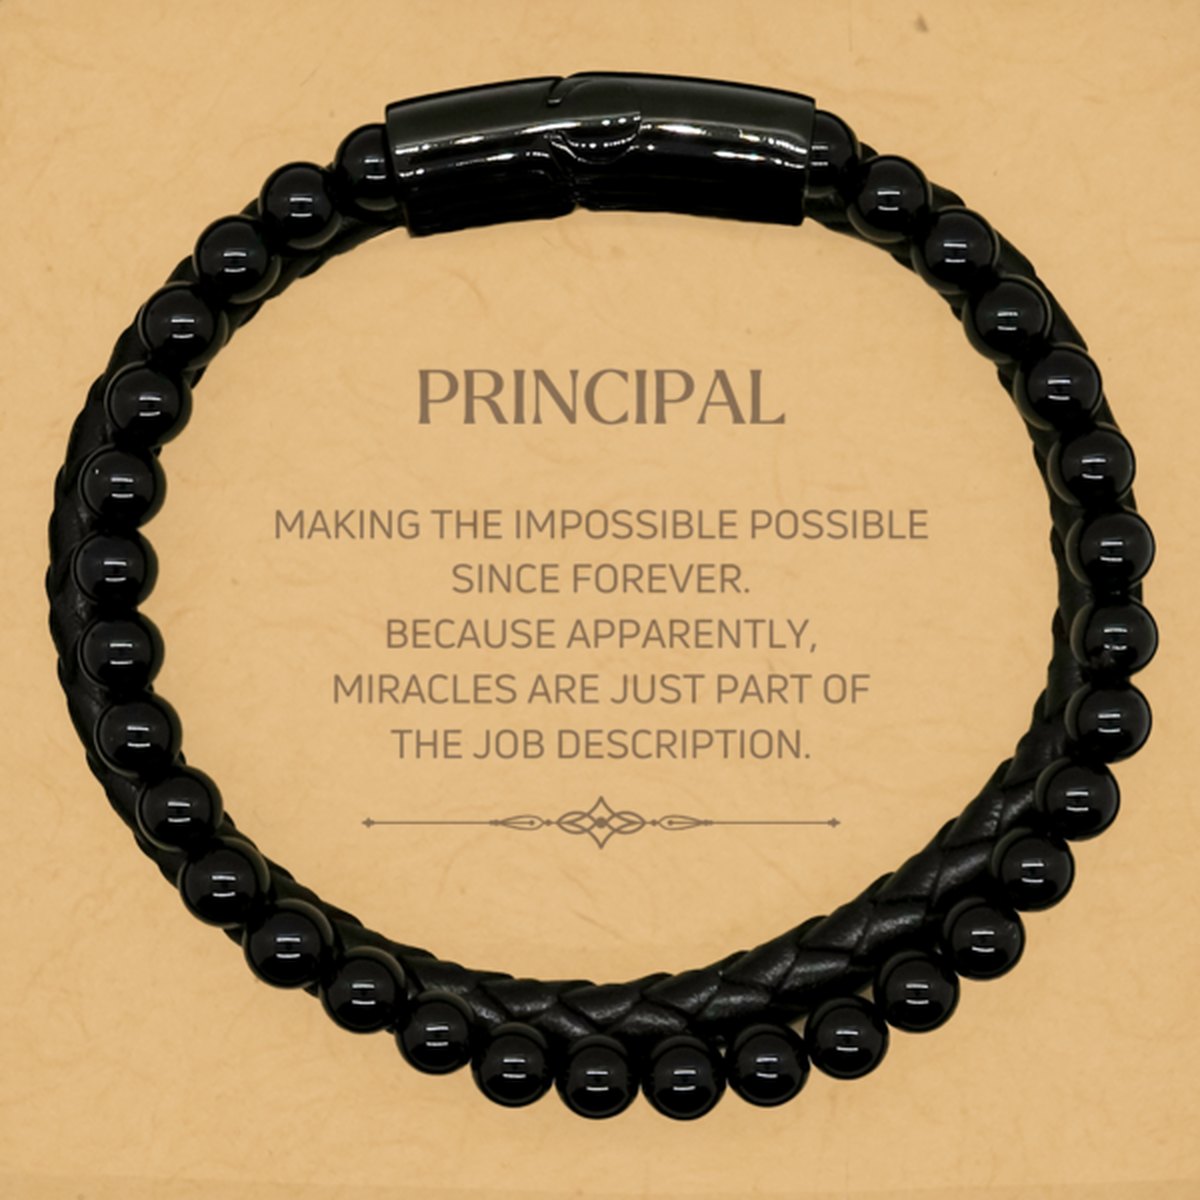 Funny Principal Gifts, Miracles are just part of the job description, Inspirational Birthday Stone Leather Bracelets For Principal, Men, Women, Coworkers, Friends, Boss